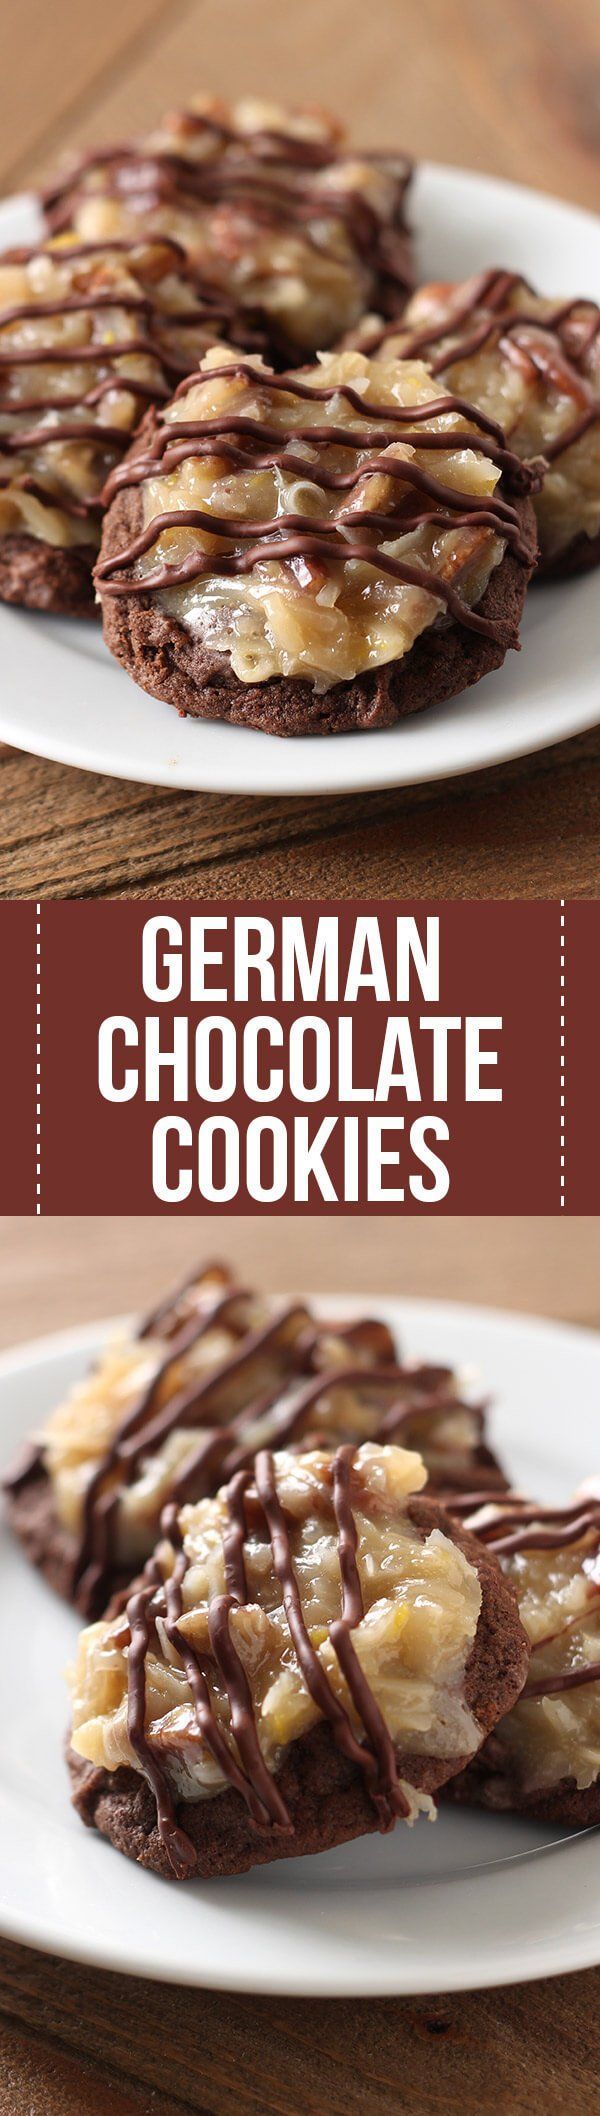 Oh my YUM!! German Chocolate Cookies feature a homemade ultra soft, chewy, gooey double chocolate cookie loaded with a flavorful